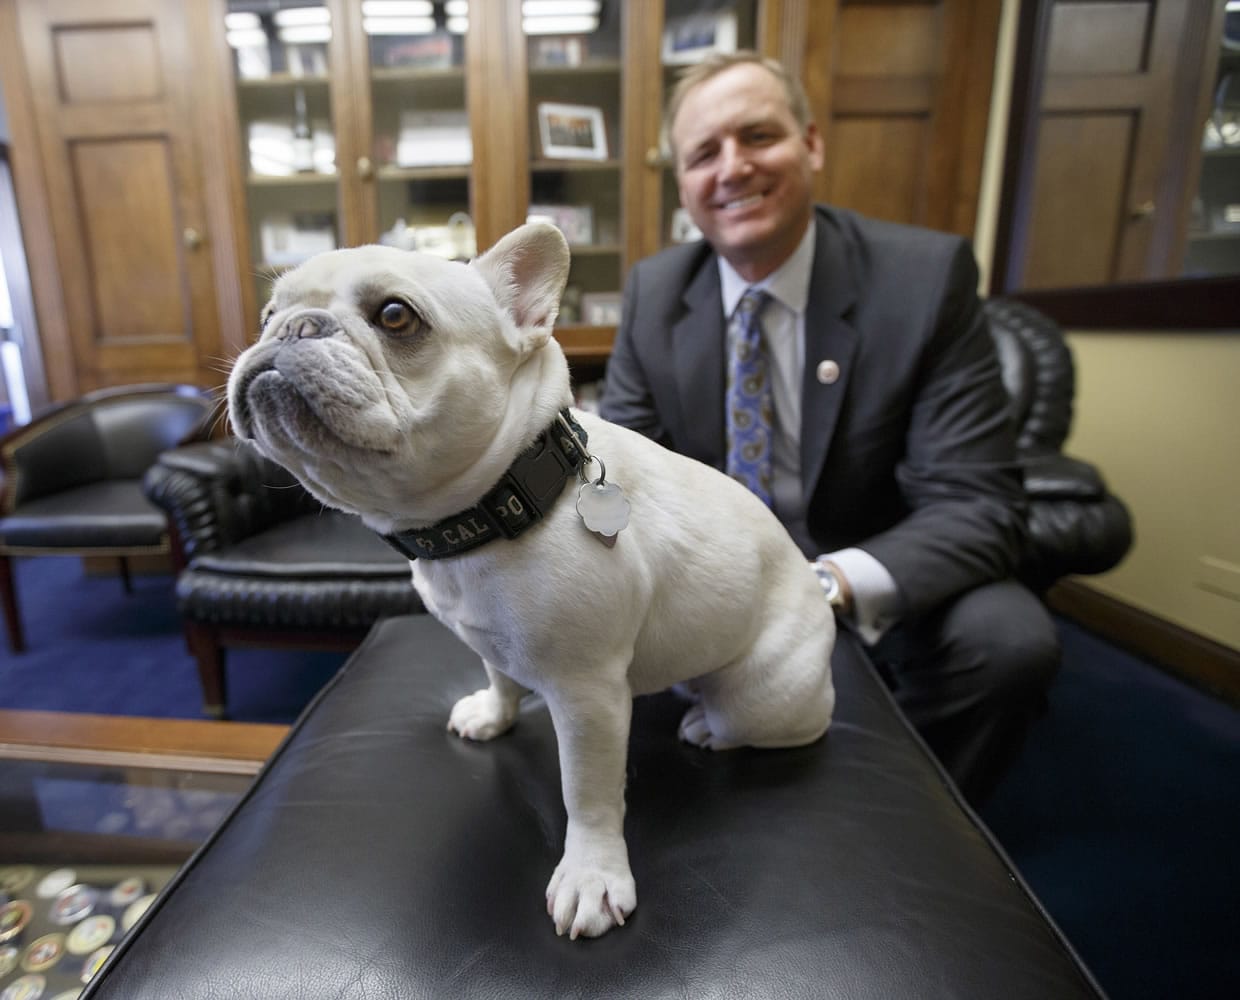 U.S. Rep. Jeff Denham, R-Calif., poses with Lily, his 15-pound French bulldog, in his office on Capitol Hill in Washington.